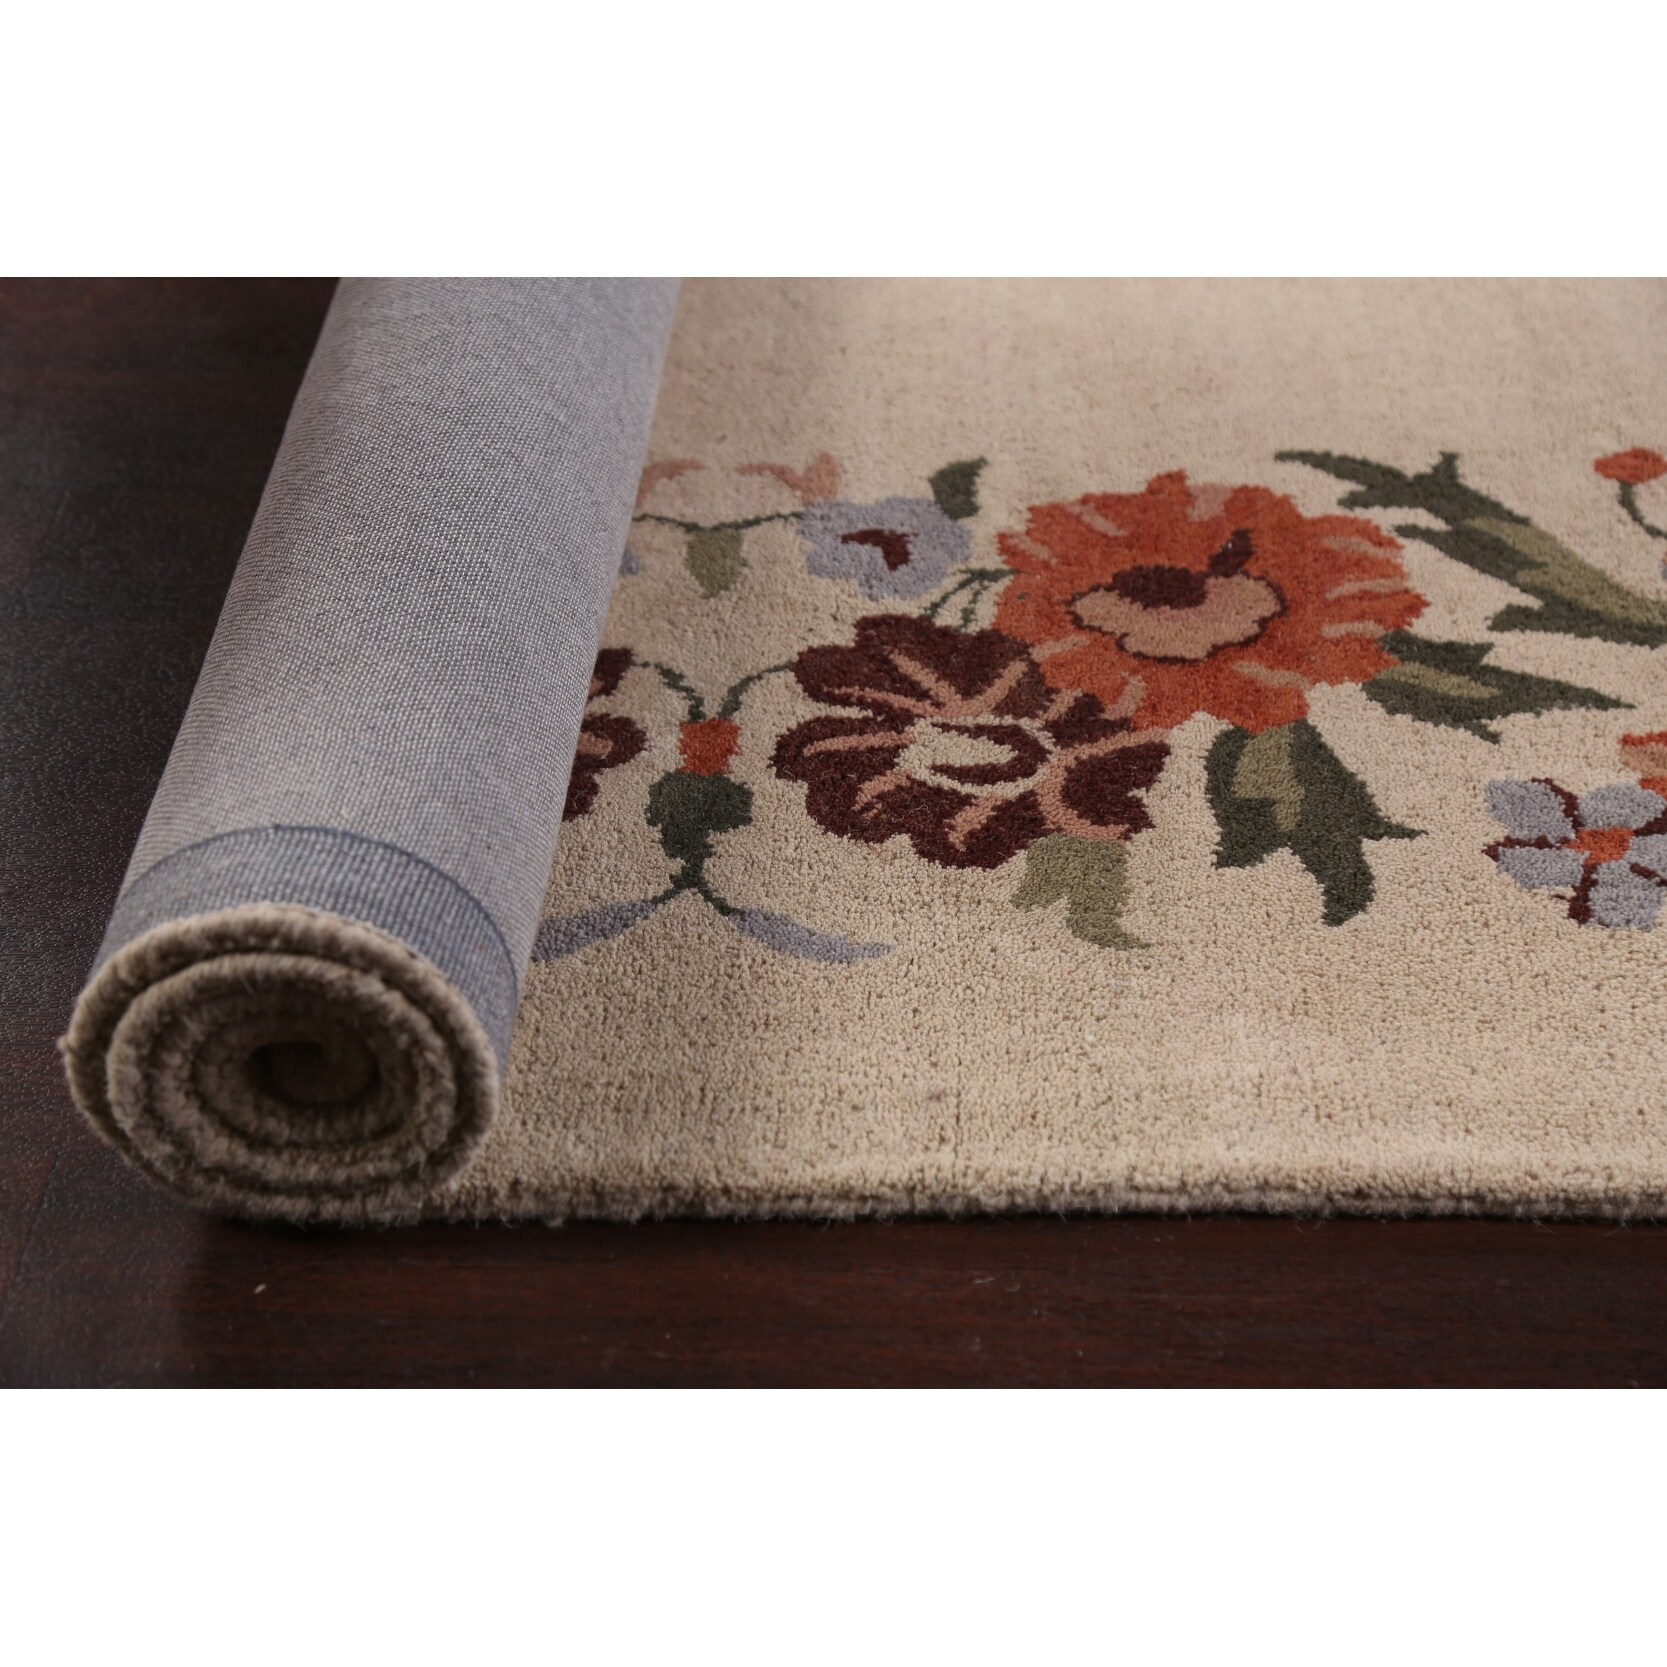 Decorative Floral Oriental Dining Room Area Rug Wool Hand-tufted - 10'0" x 13'0"